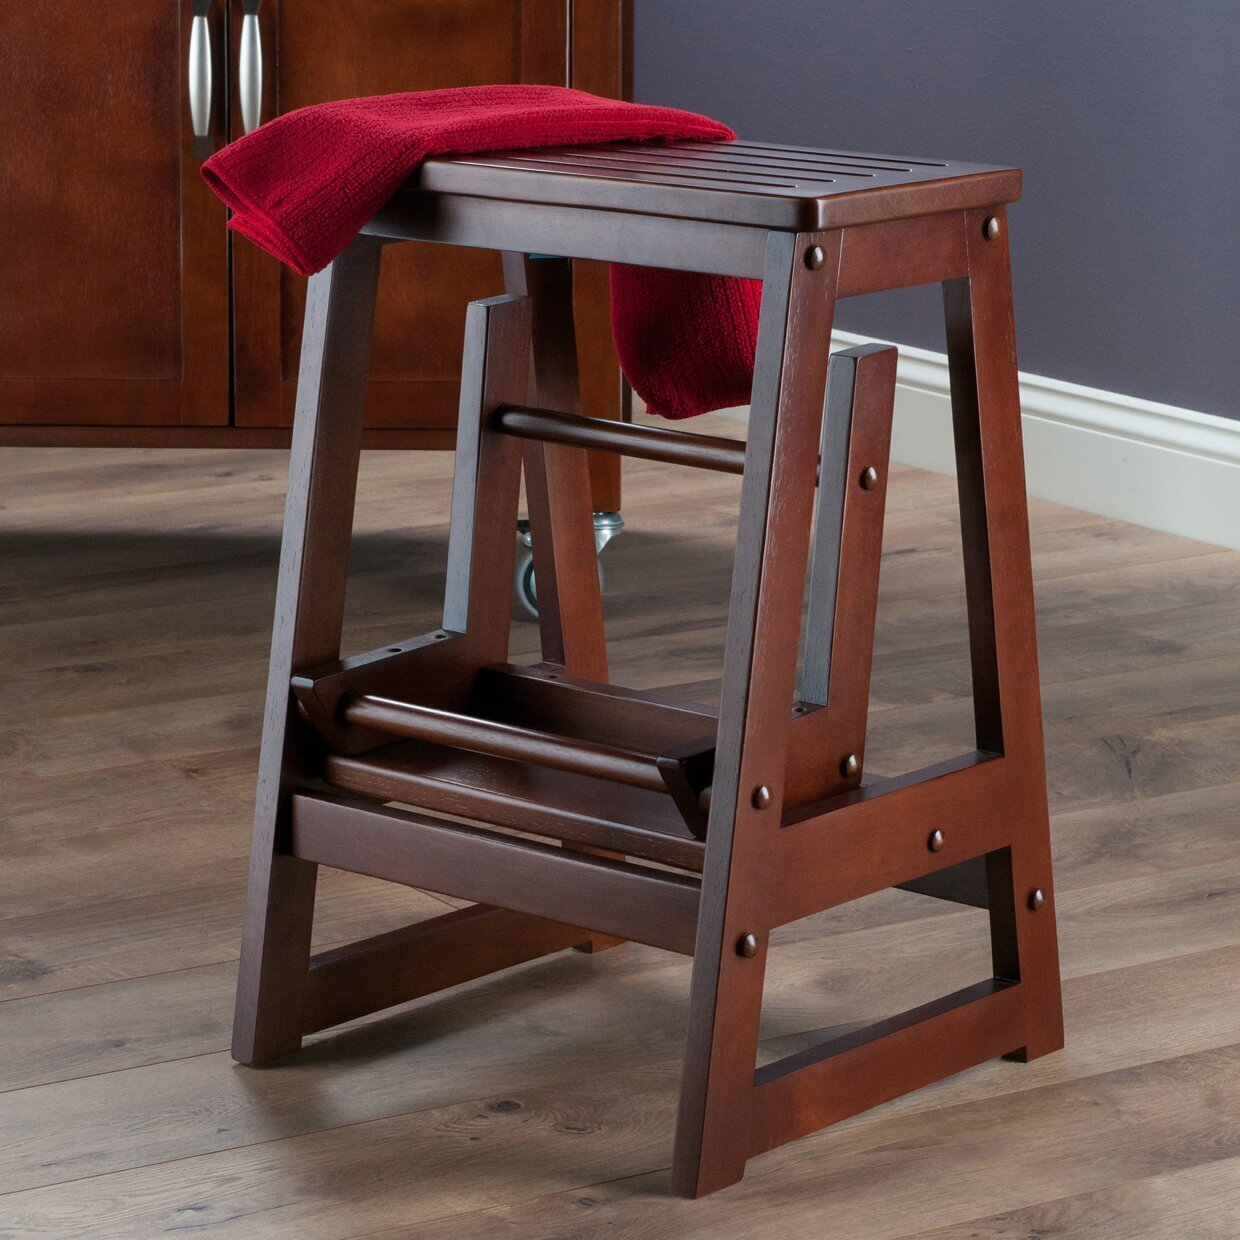 Folding wooden step stool for adults (2 steps)